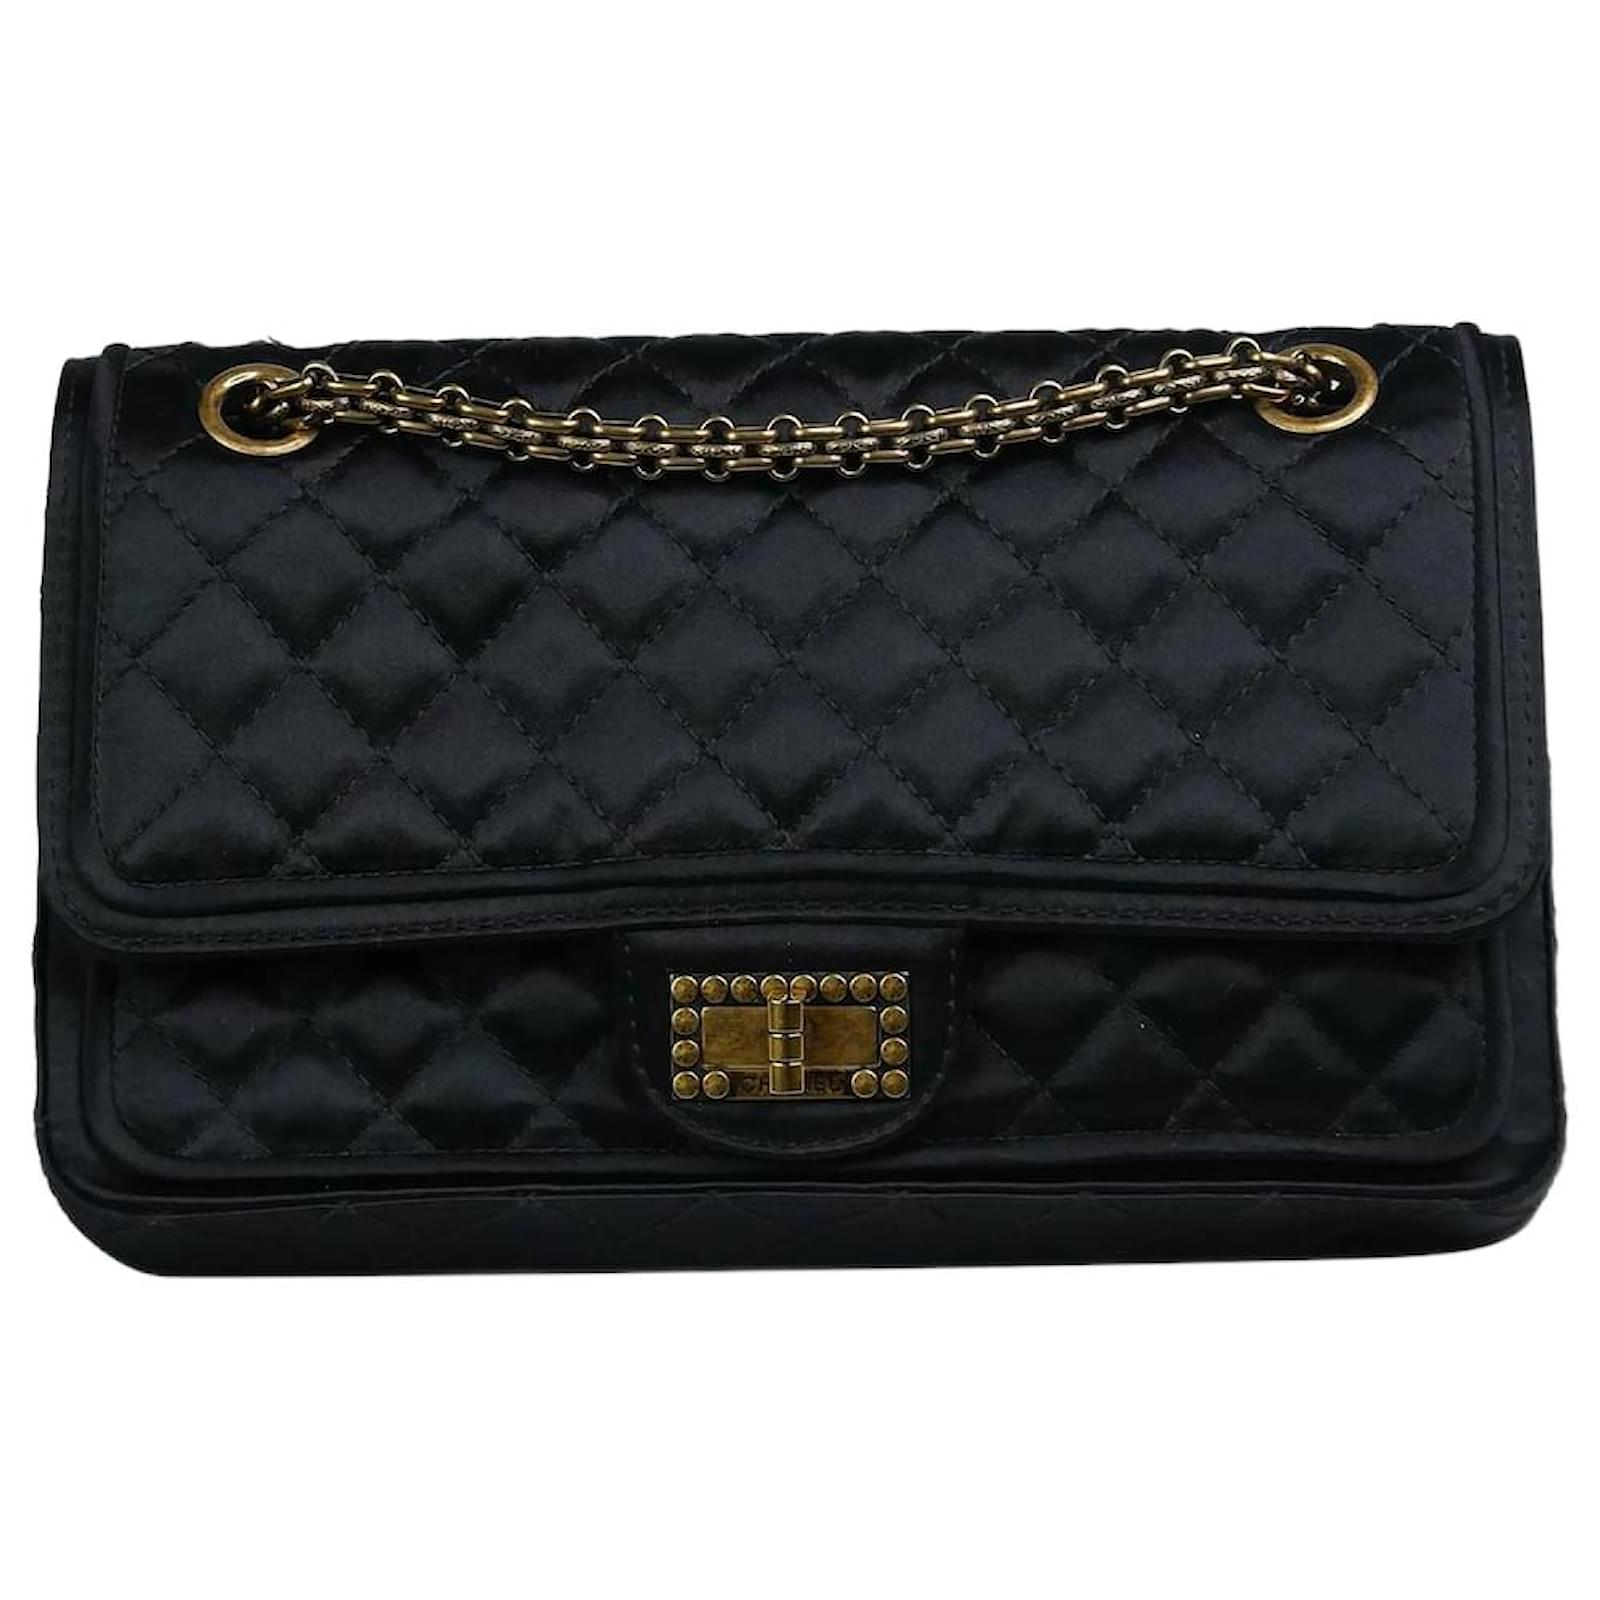 New Chanel Mademoiselle Bag Black Quilted Gold HW